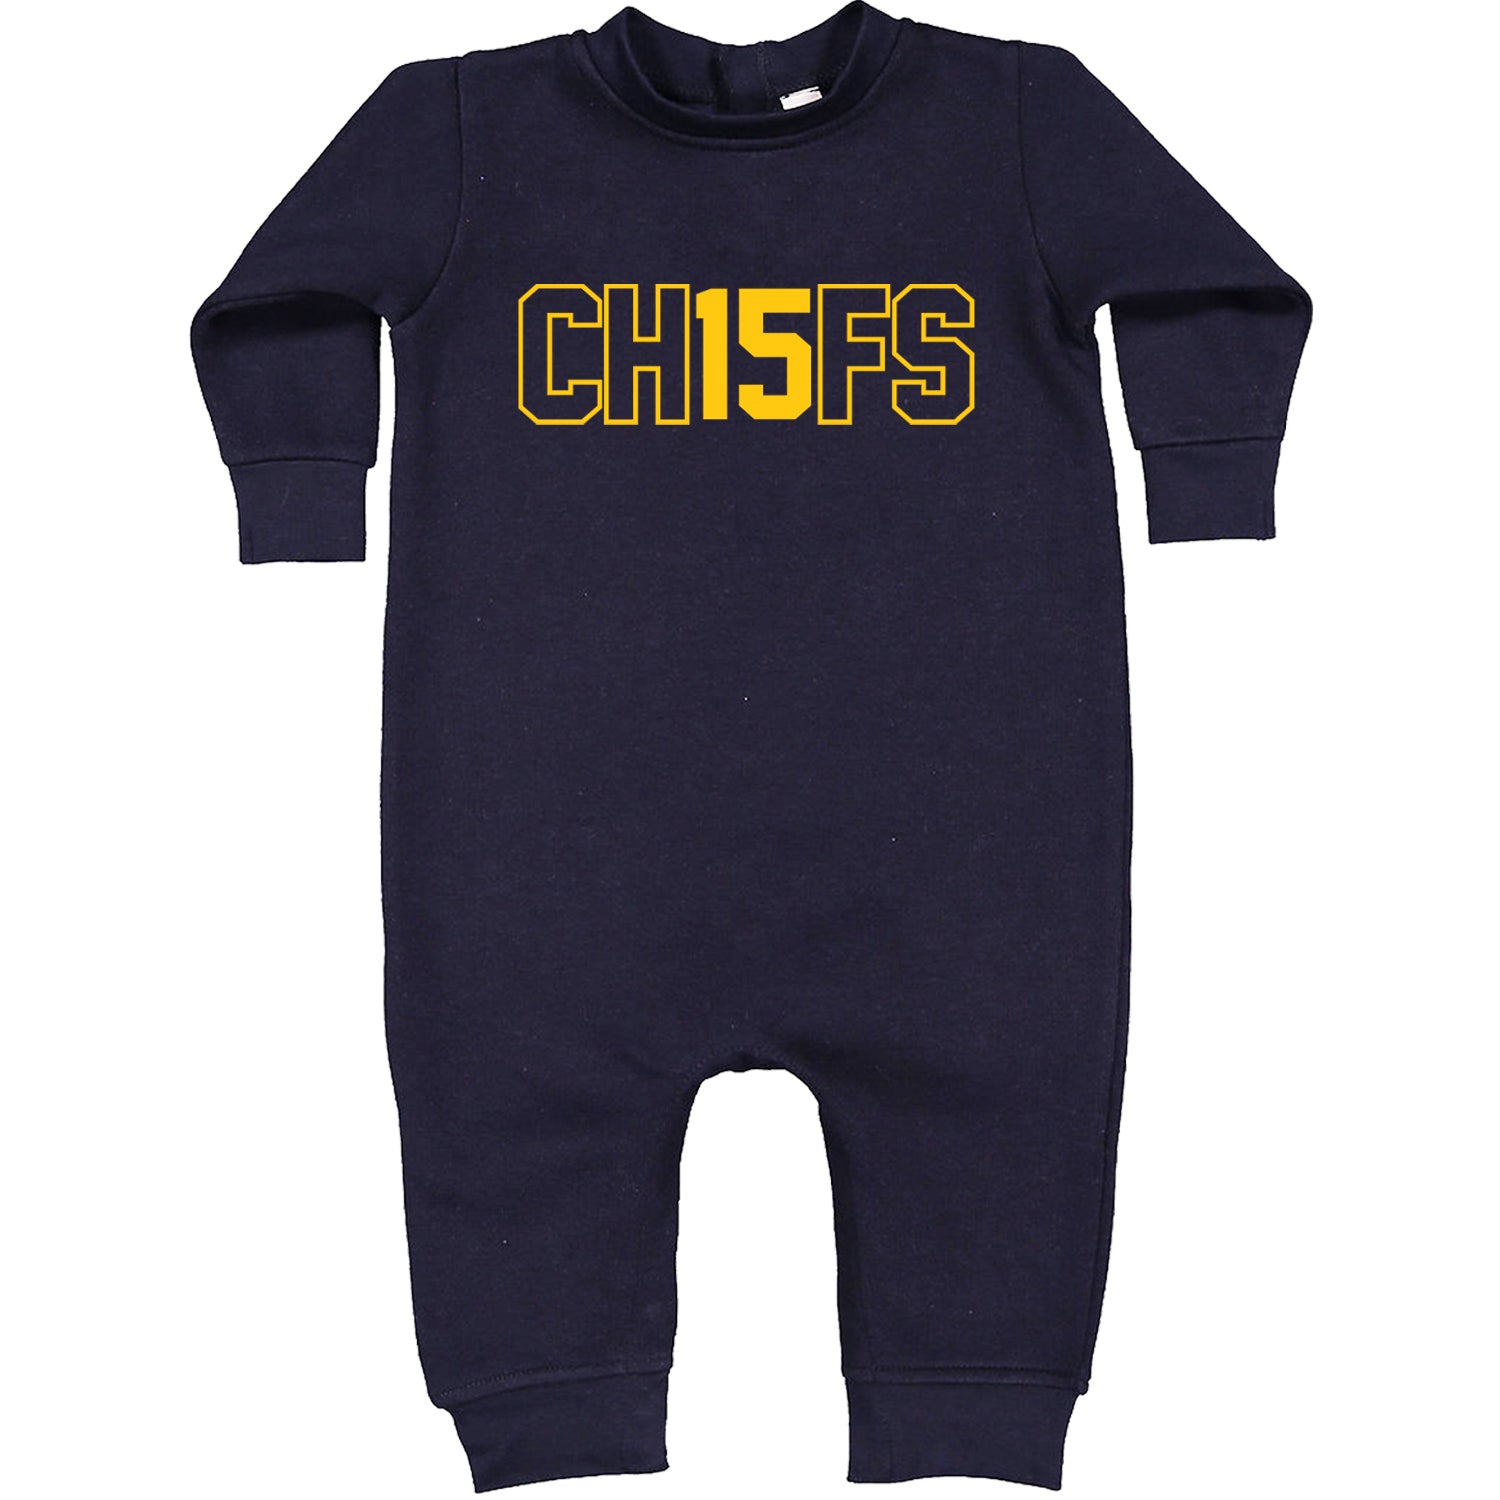 Ch15fs Chief 15 Shirt Toddler Hoodie And Infant Fleece Romper Navy Blue